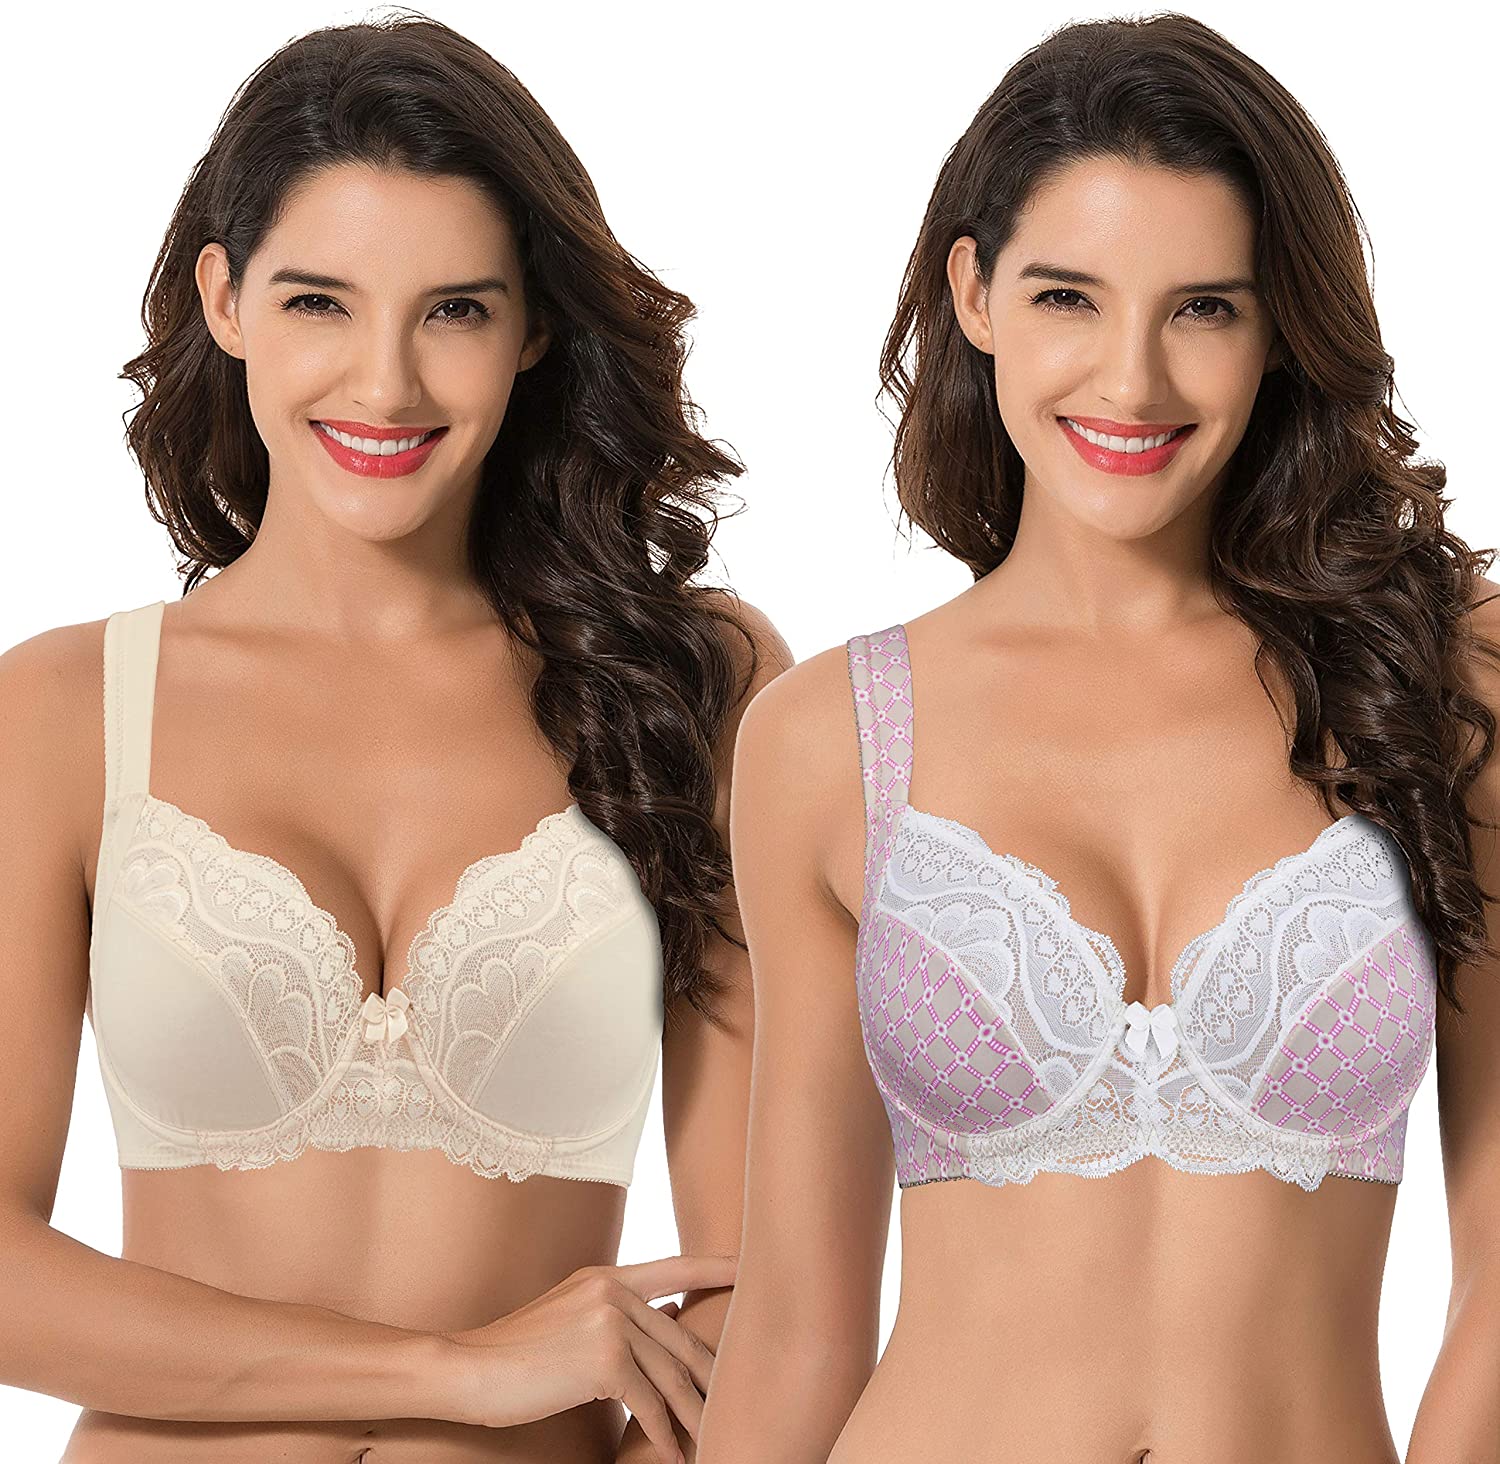 Curve Muse Women's Plus Size Unlined Underwire Lace Bra with Cushion  Straps-2PK-Dark Red,Nude-42B